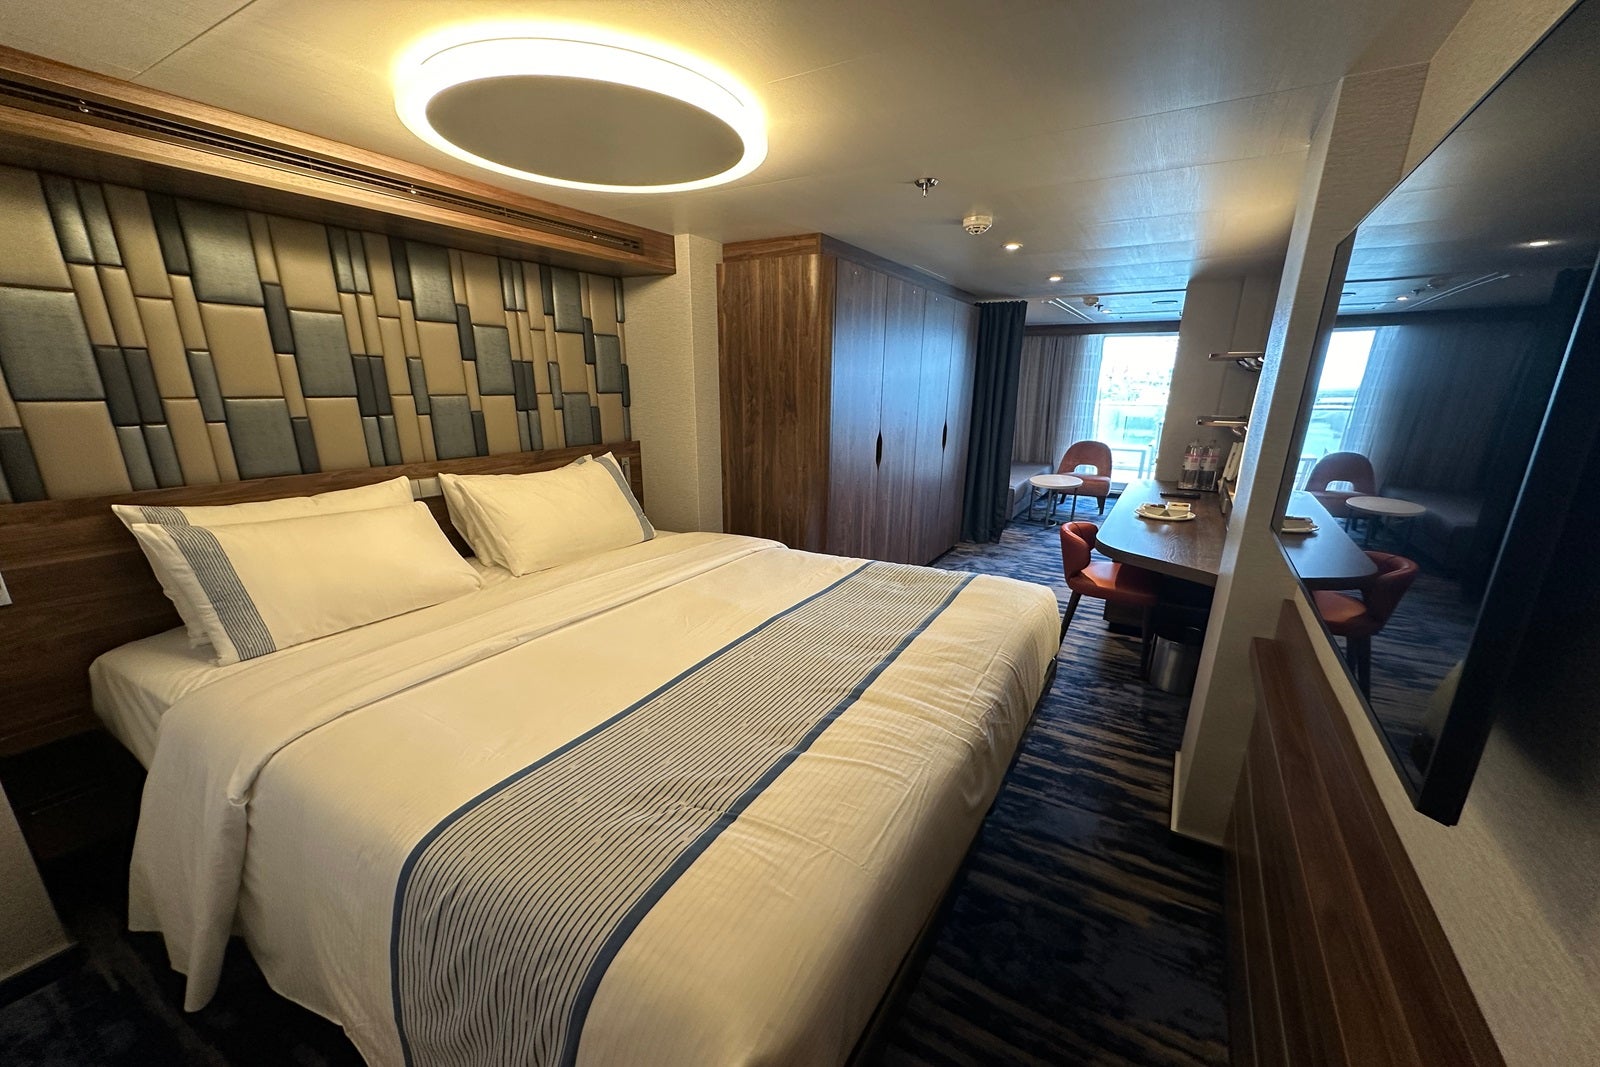 A cruise ship cabin with a queen bed a closet, a sofa, a vanity and a balcony